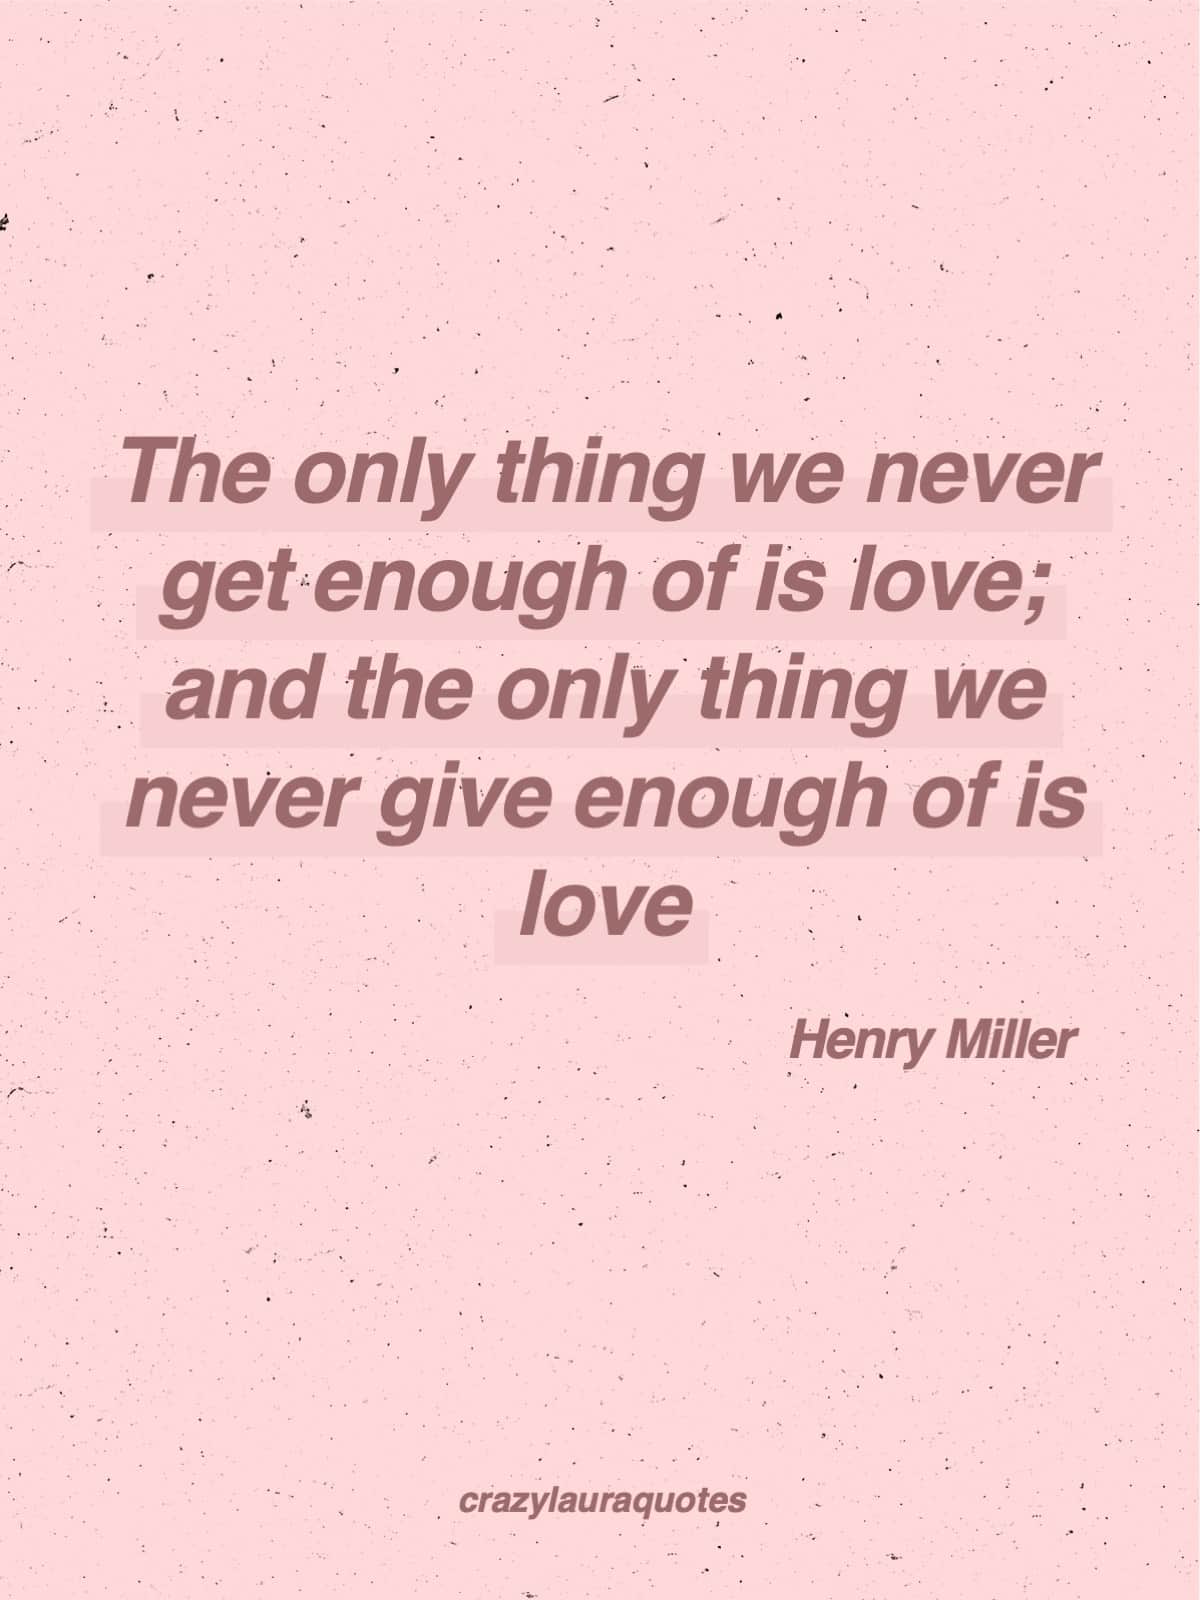 receiving ang giving love henry miller saying